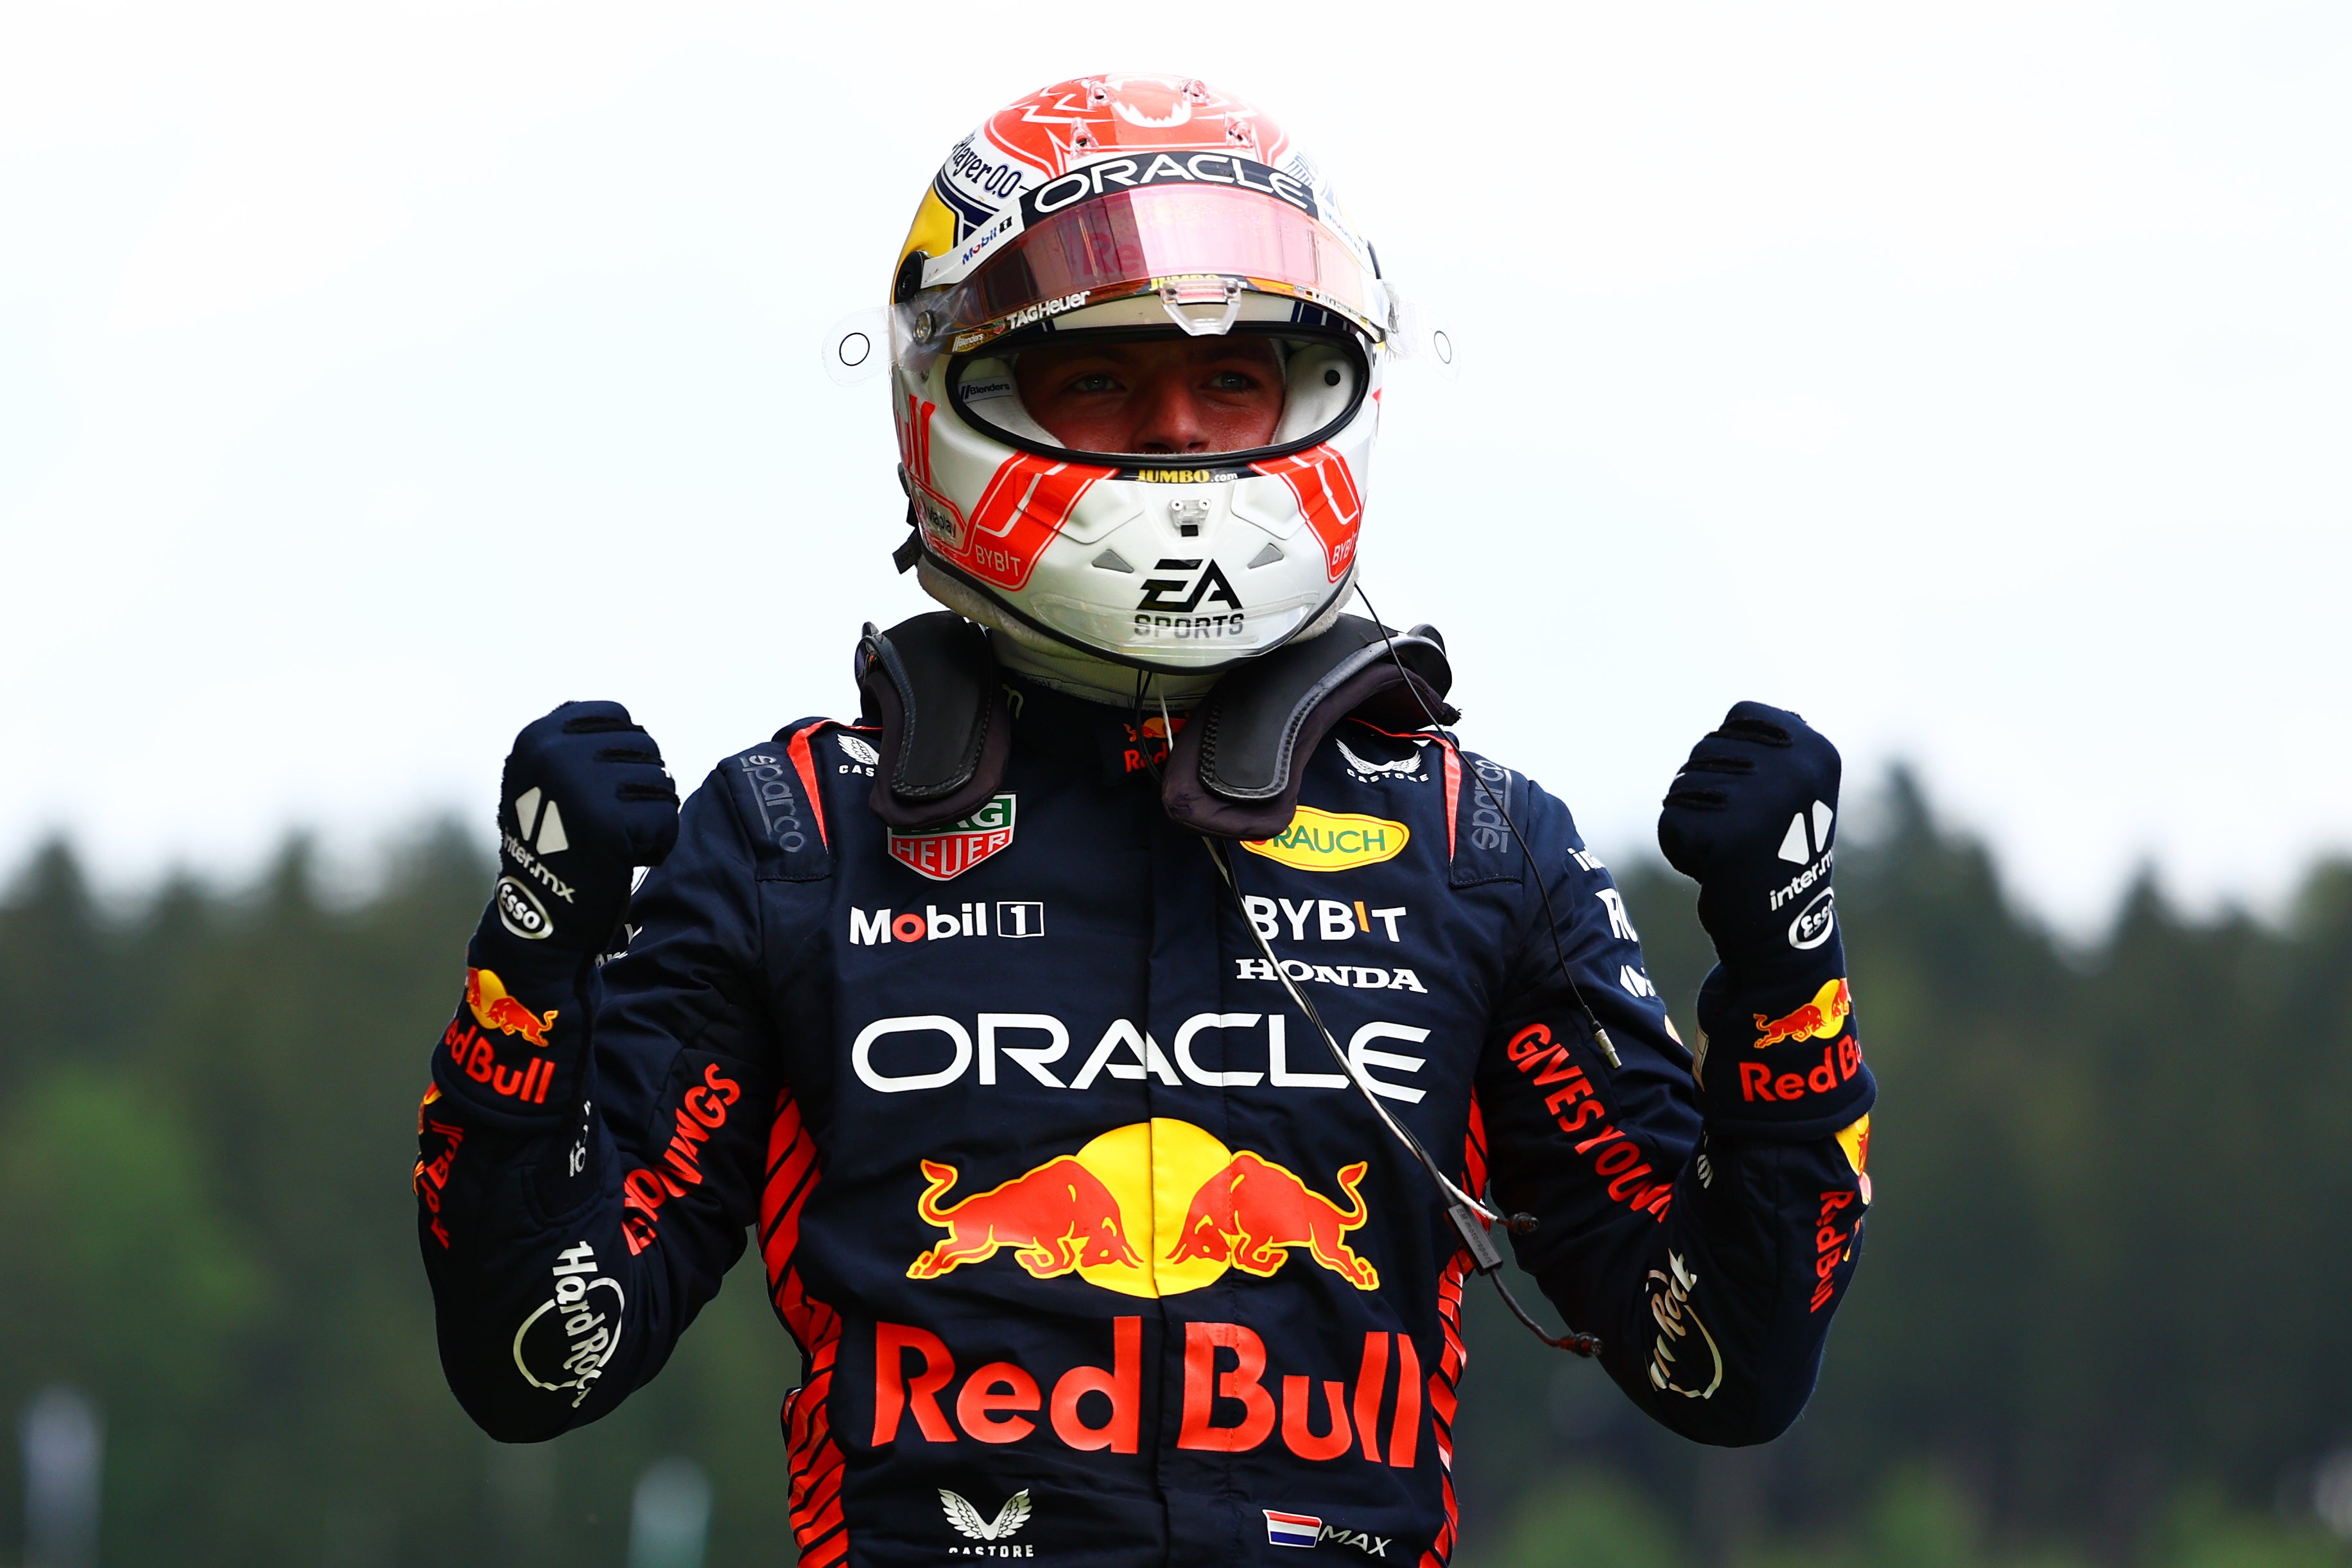 Max Verstappen claimed his fourth pole position in a row